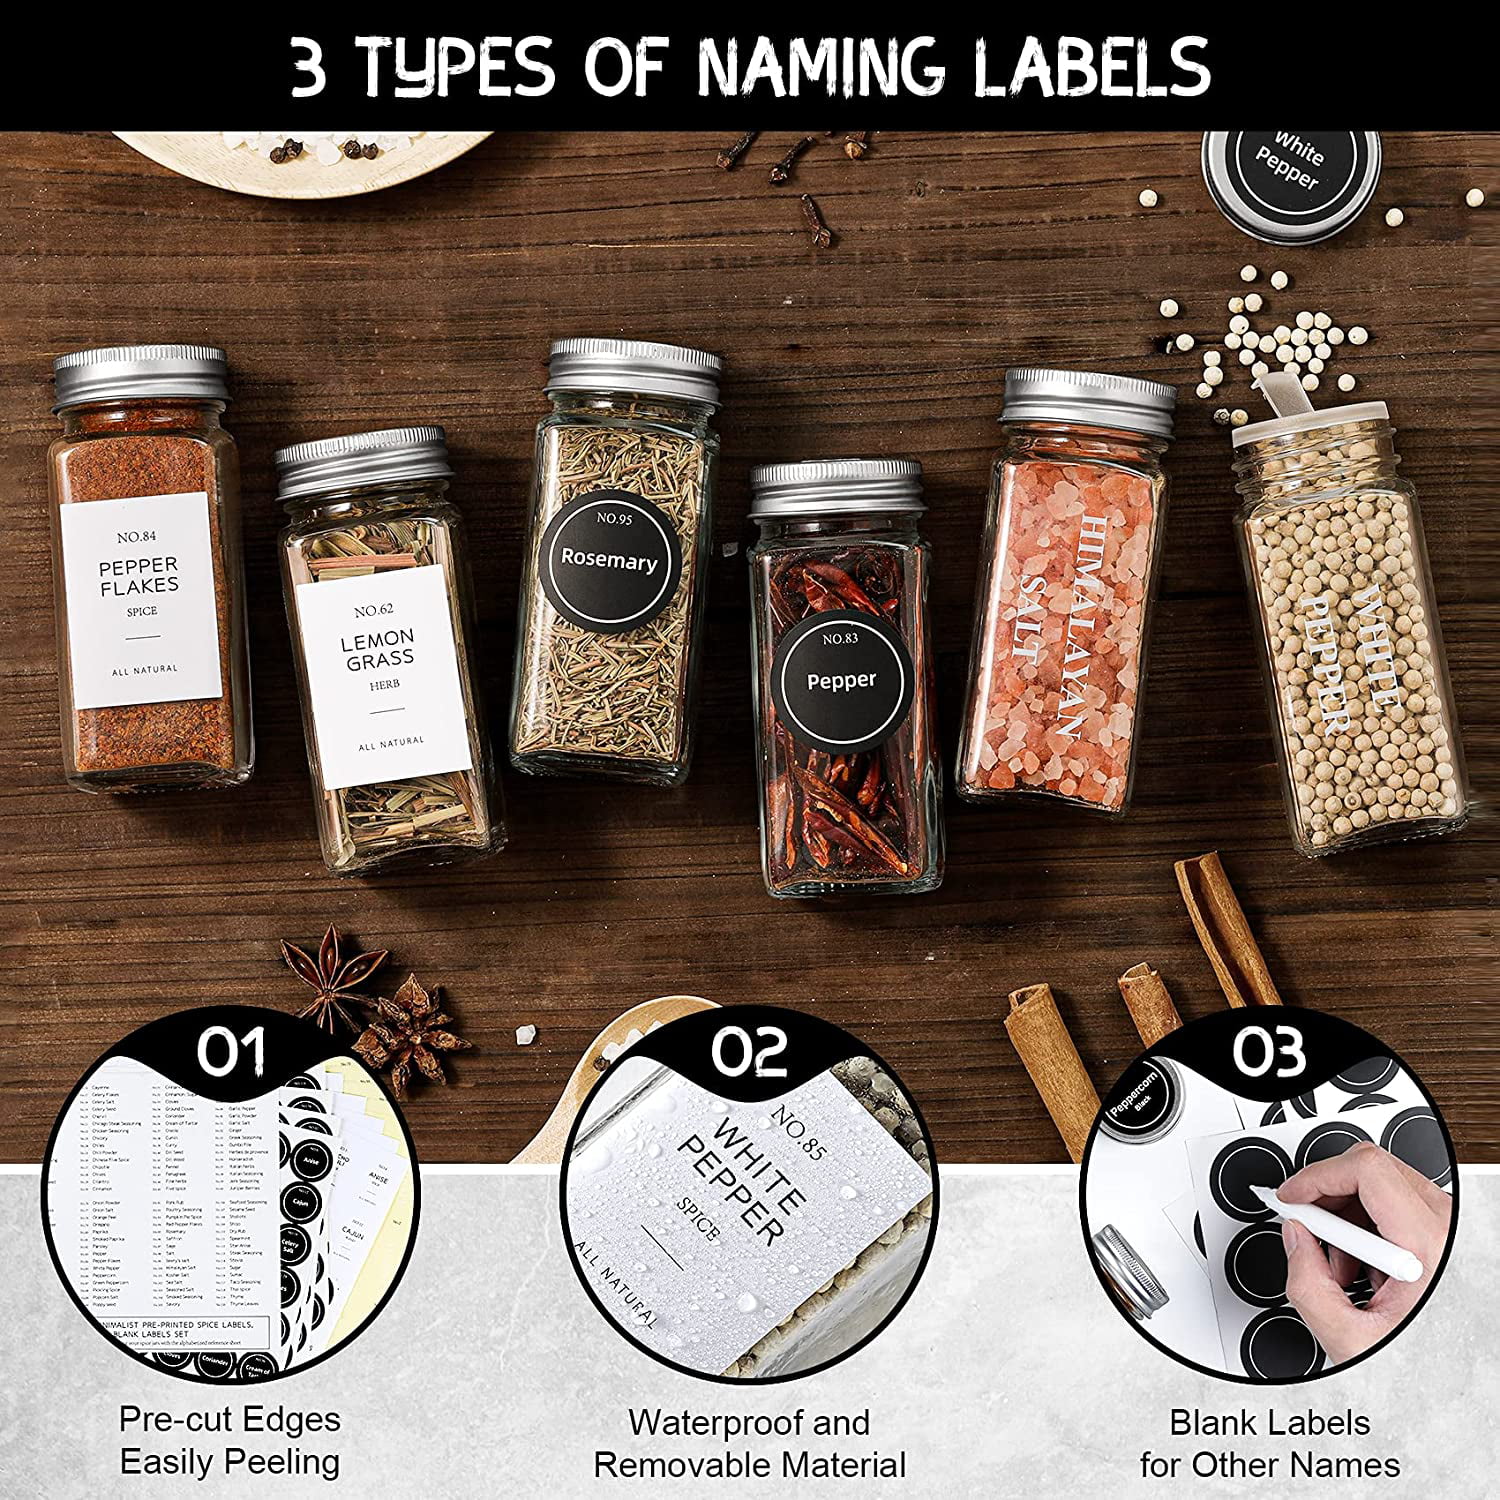 Spice Jars with Labels - Glass Spice Jars with Shaker Lids